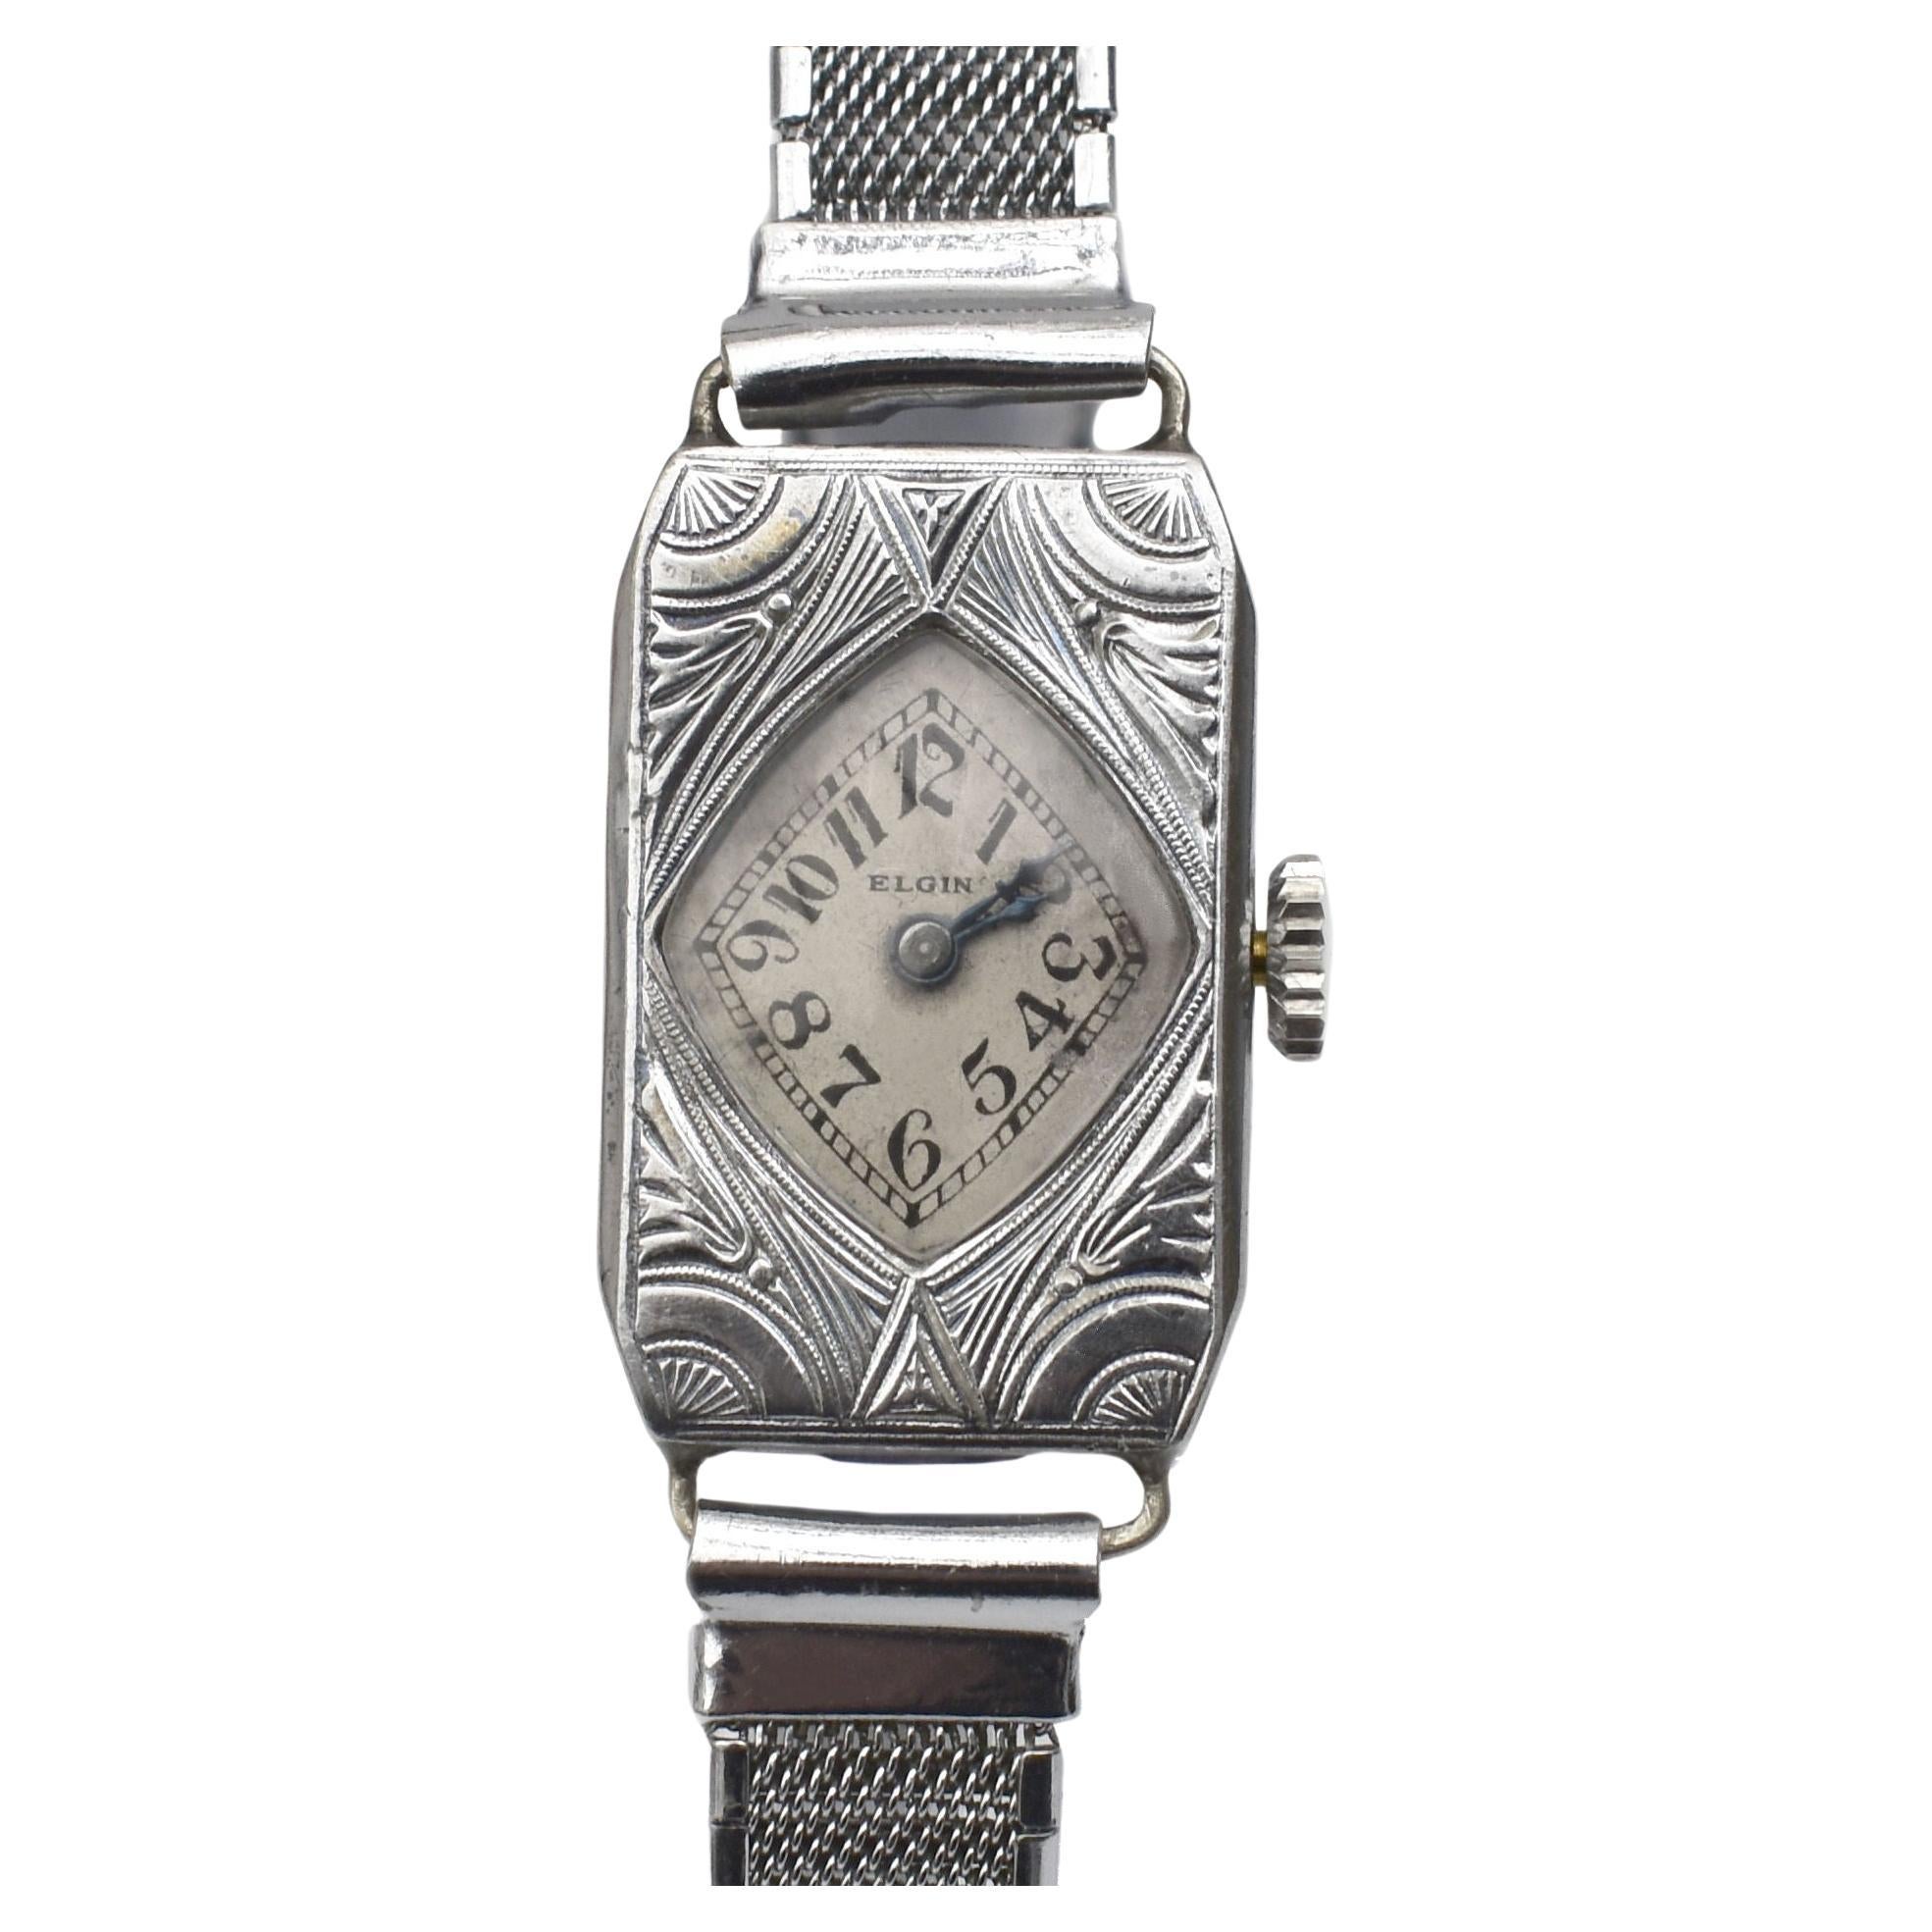 Art Deco Ladies White GF Wrist Watch by Elgin, Fully Serviced, C1934 For Sale